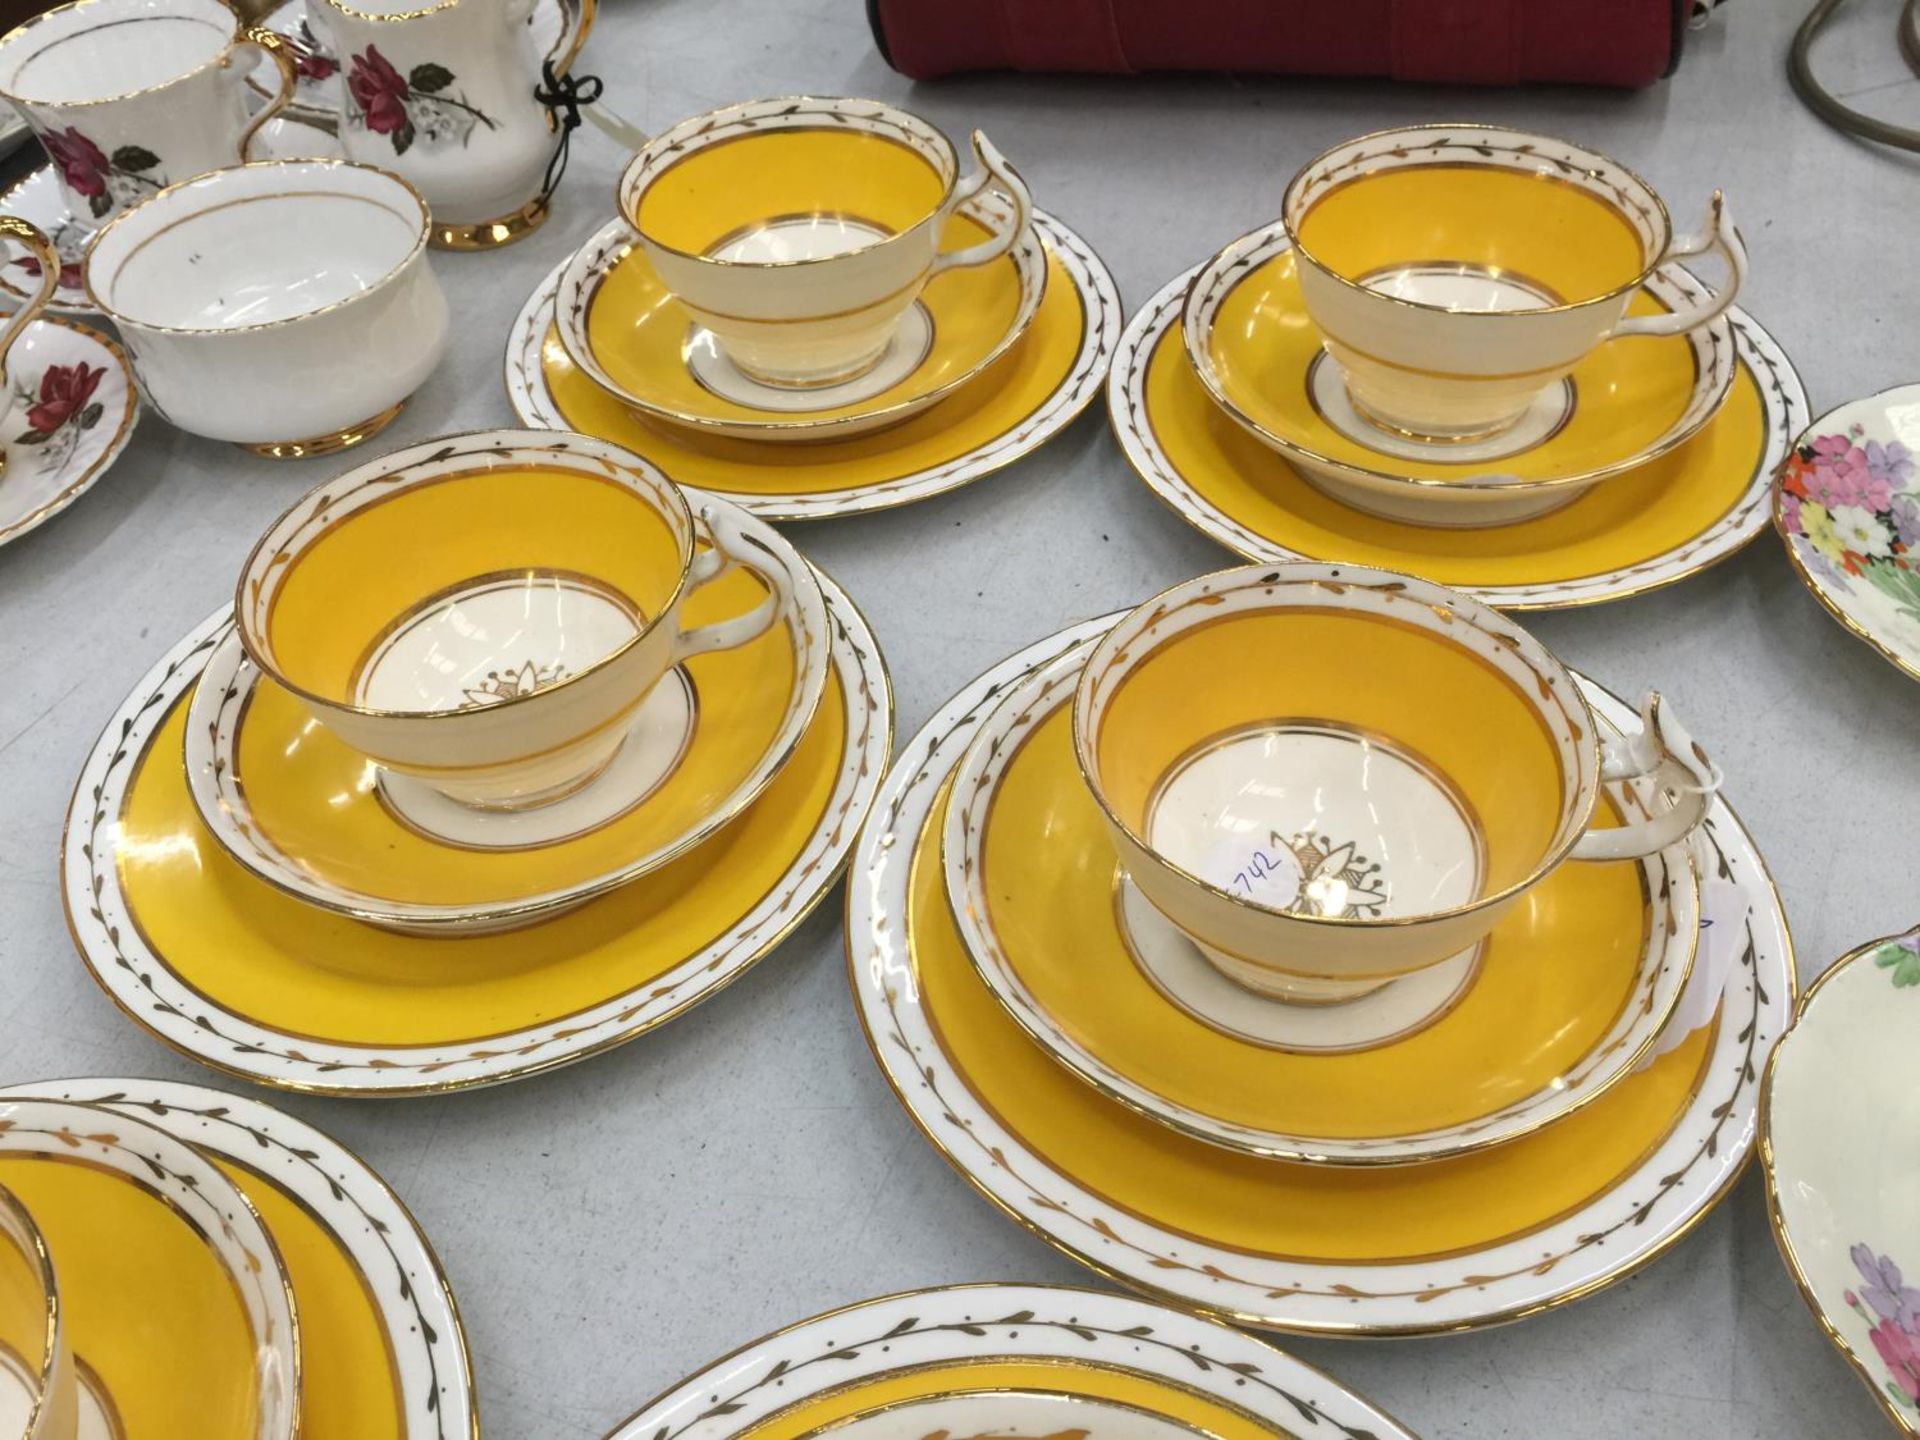 A QUANTITY OF WETLEY CHINA CUPS, SAUCERS AND PLATES IN A VIBRANT YELLOW AND GUILD COLOUR - Image 3 of 5